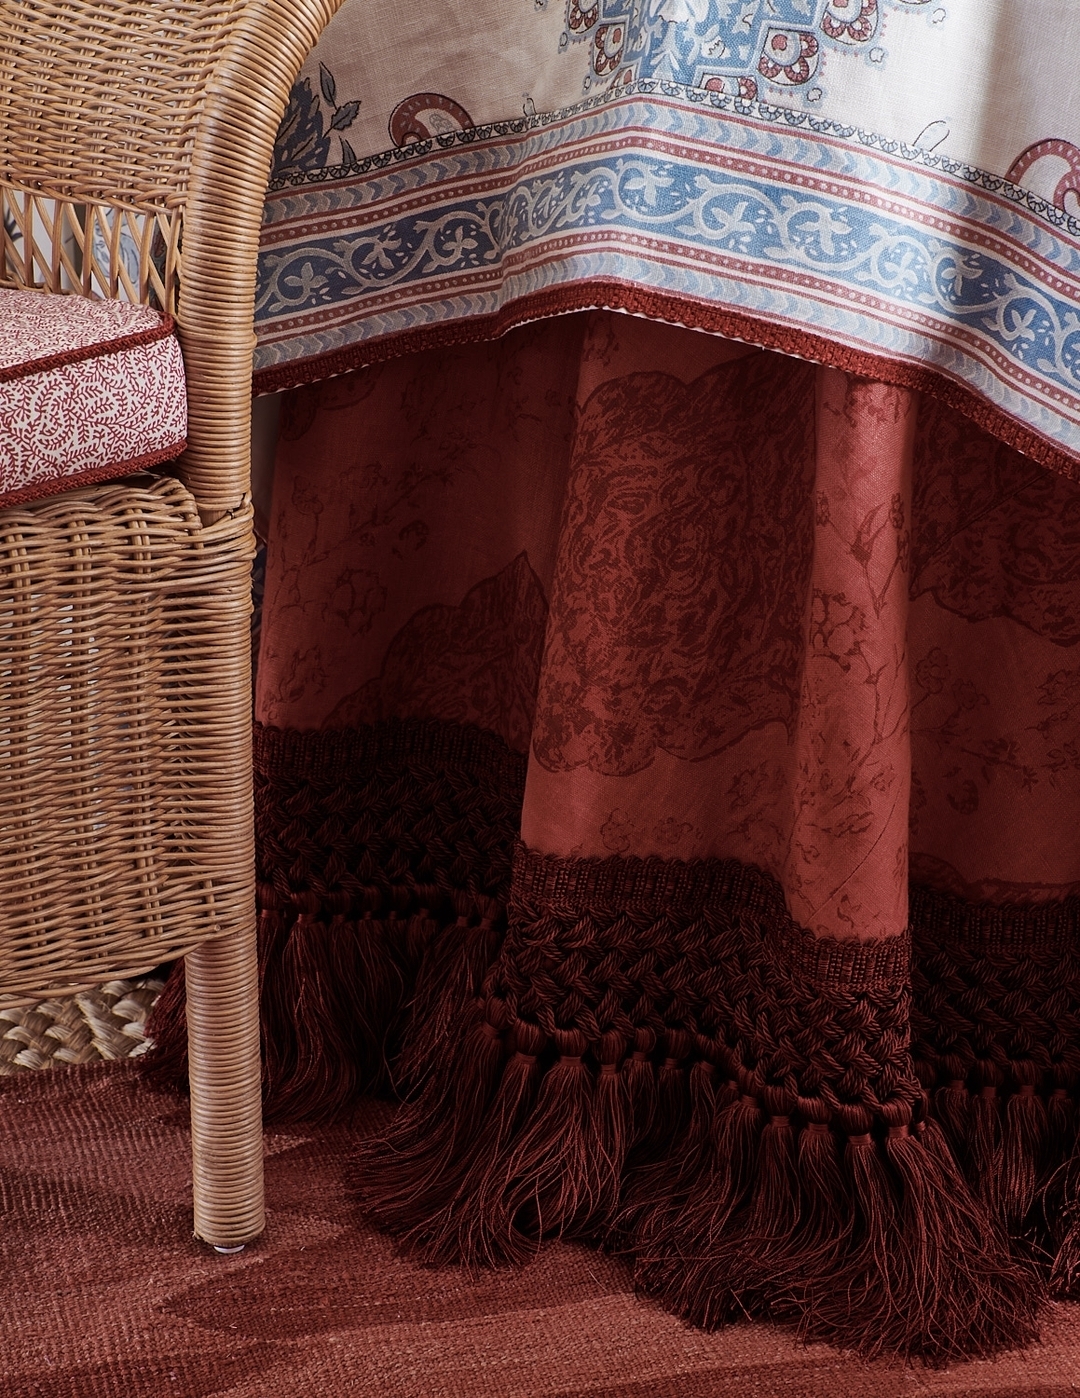 A table skirt with tassel fringe and a chair with a red and white fabric, adding a touch of vibrant colors to the room's decor.